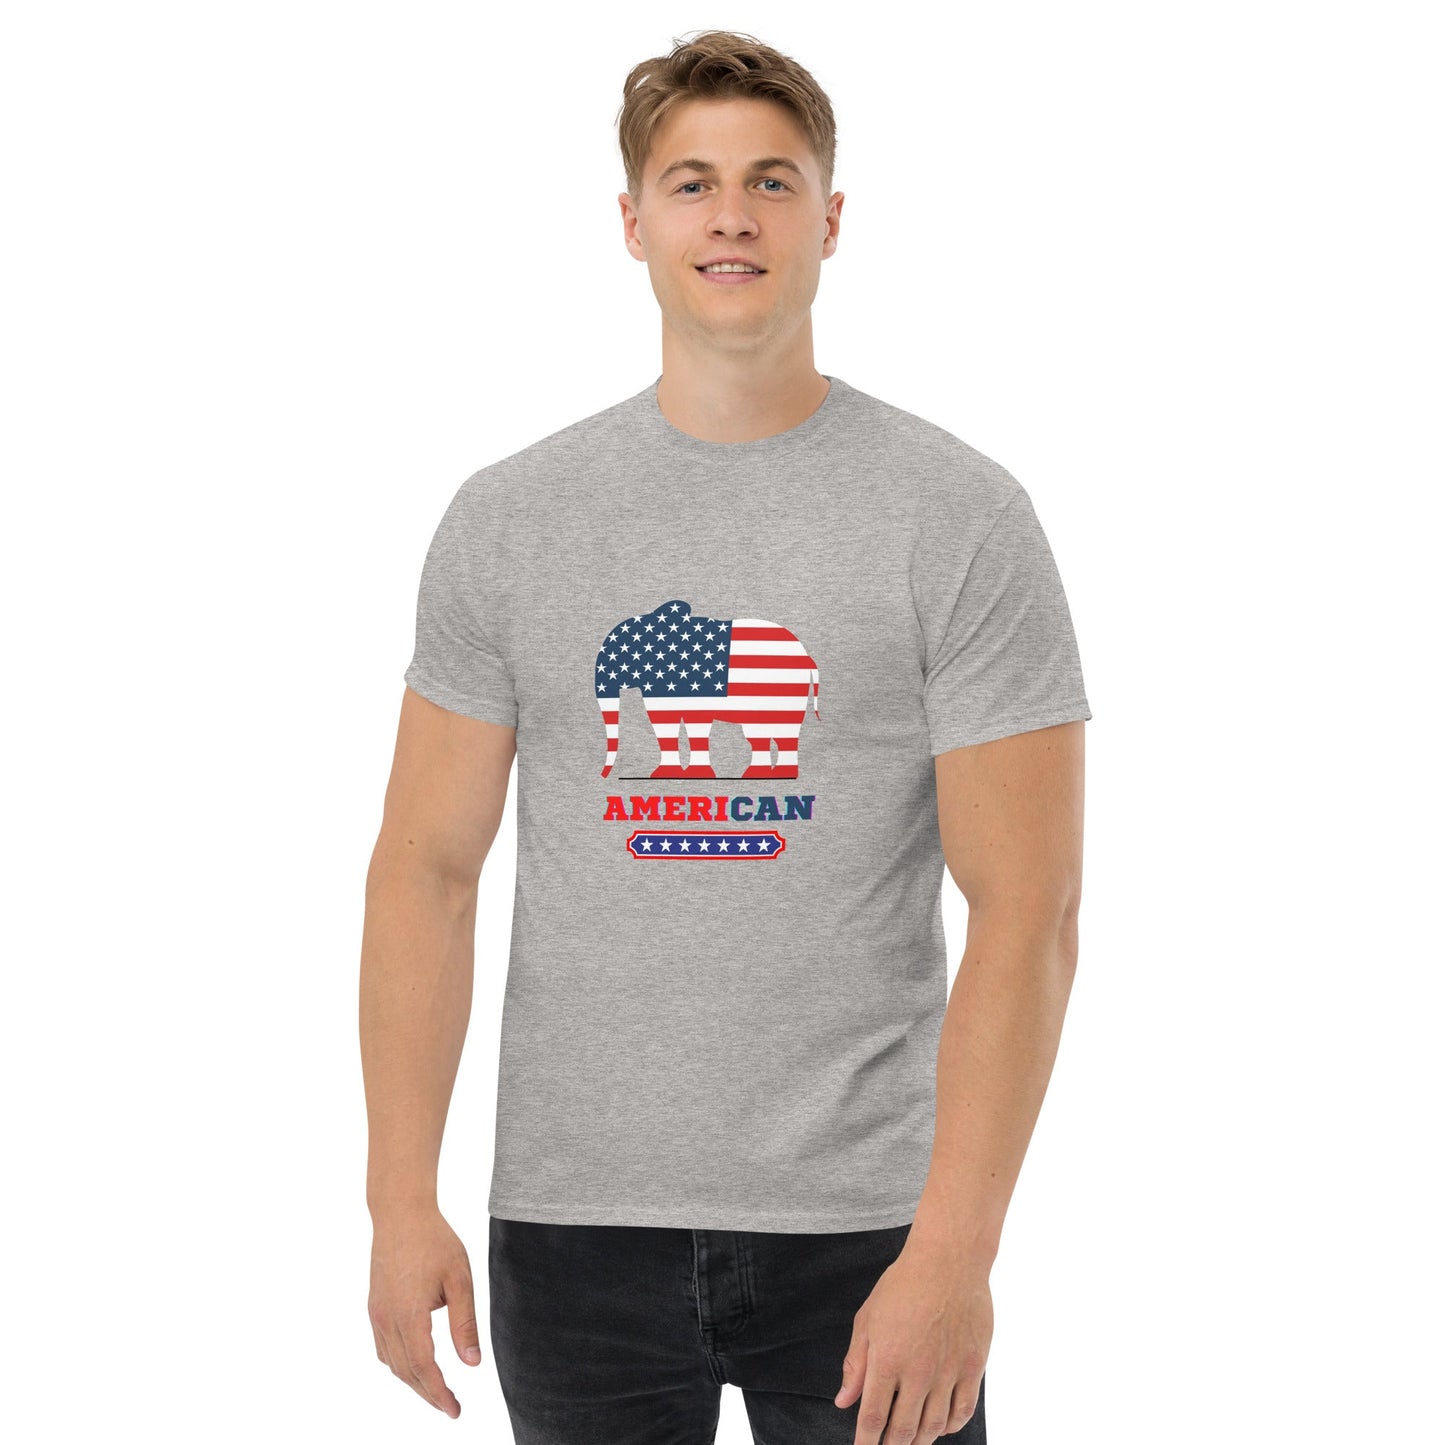 AMERICAN MEN'S T-SHIRT "ELEPHANT" SILVER FRONT  - www.firstamericanstore.com